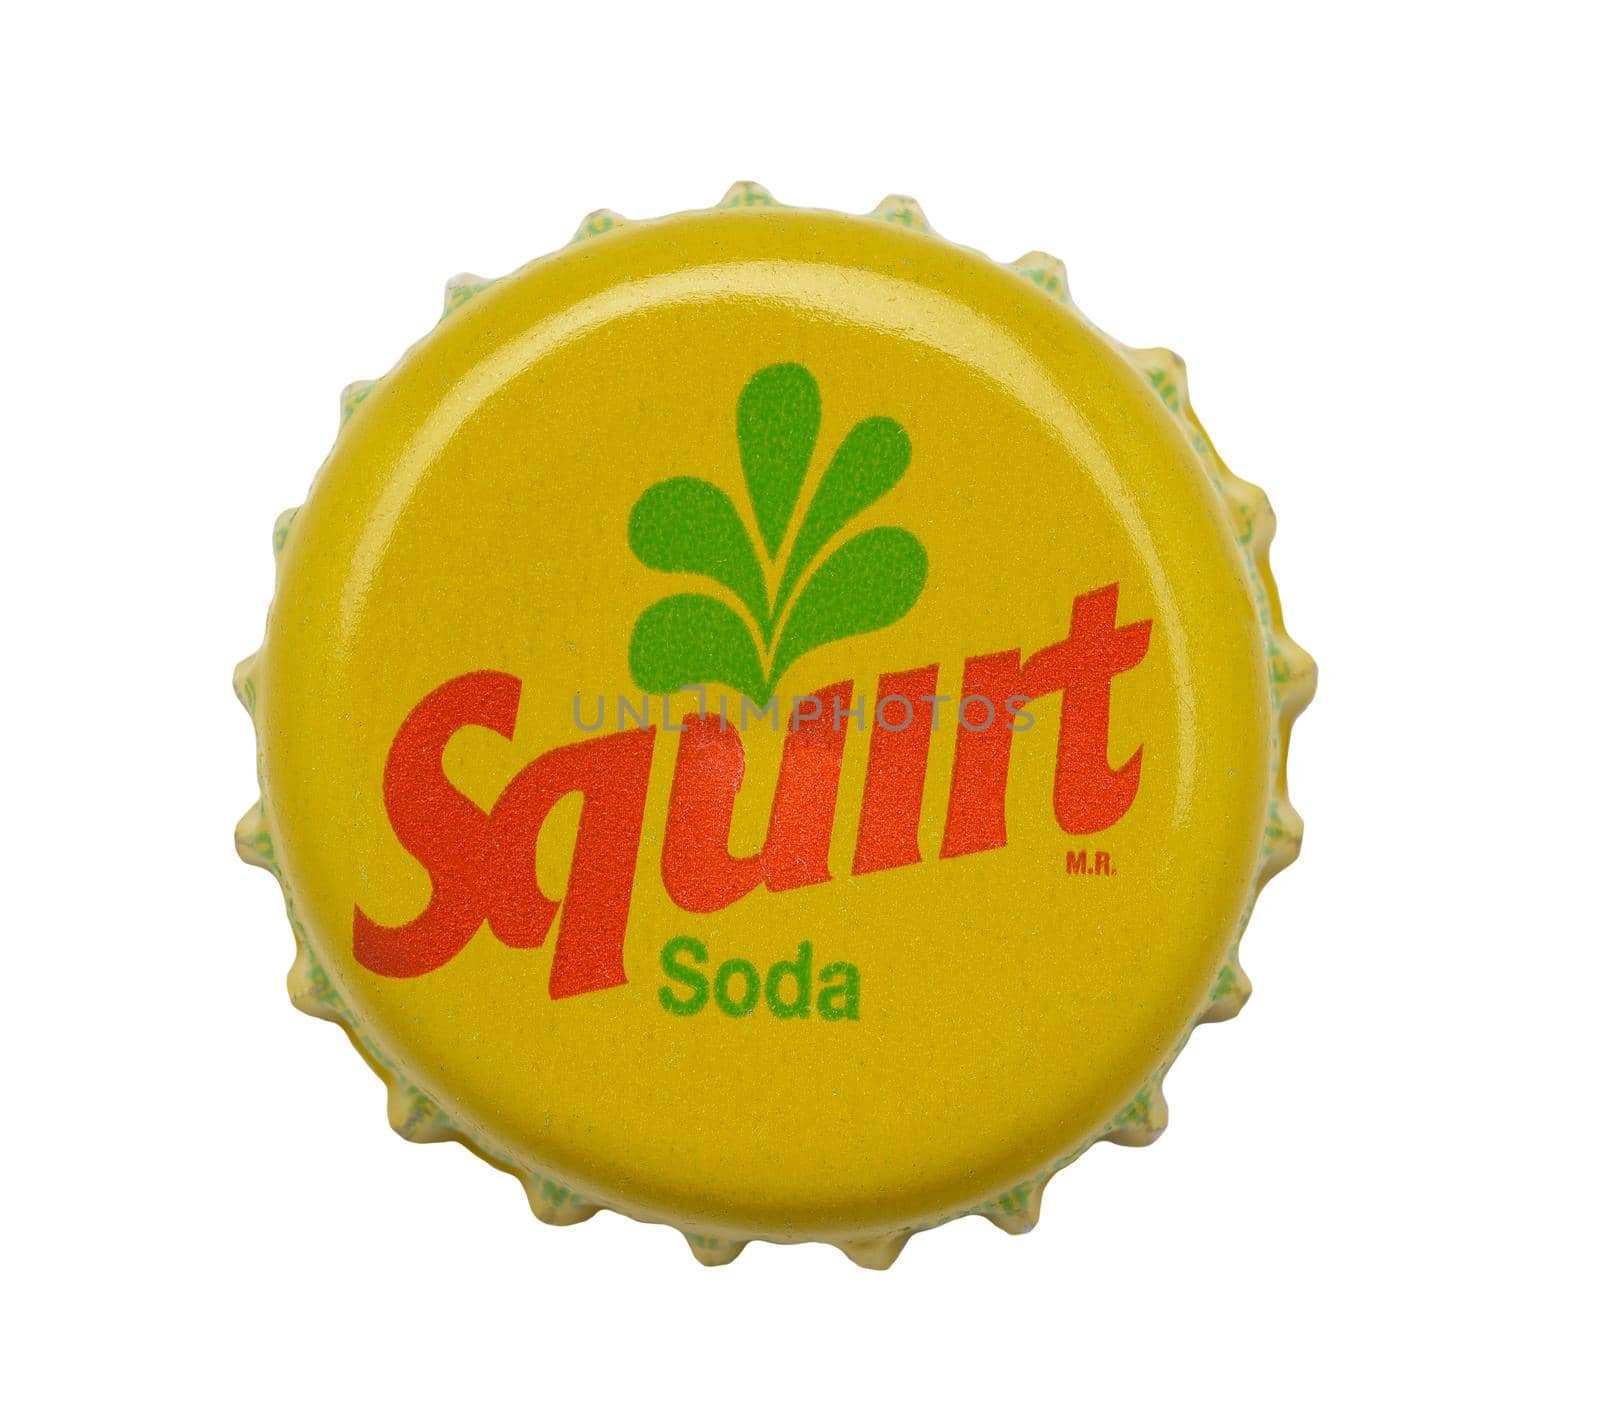 IRVINE, CALIFORNIA - 4 JUNE 2020: Closeup of a Squirt Soda beer bottle cap on white. by sCukrov